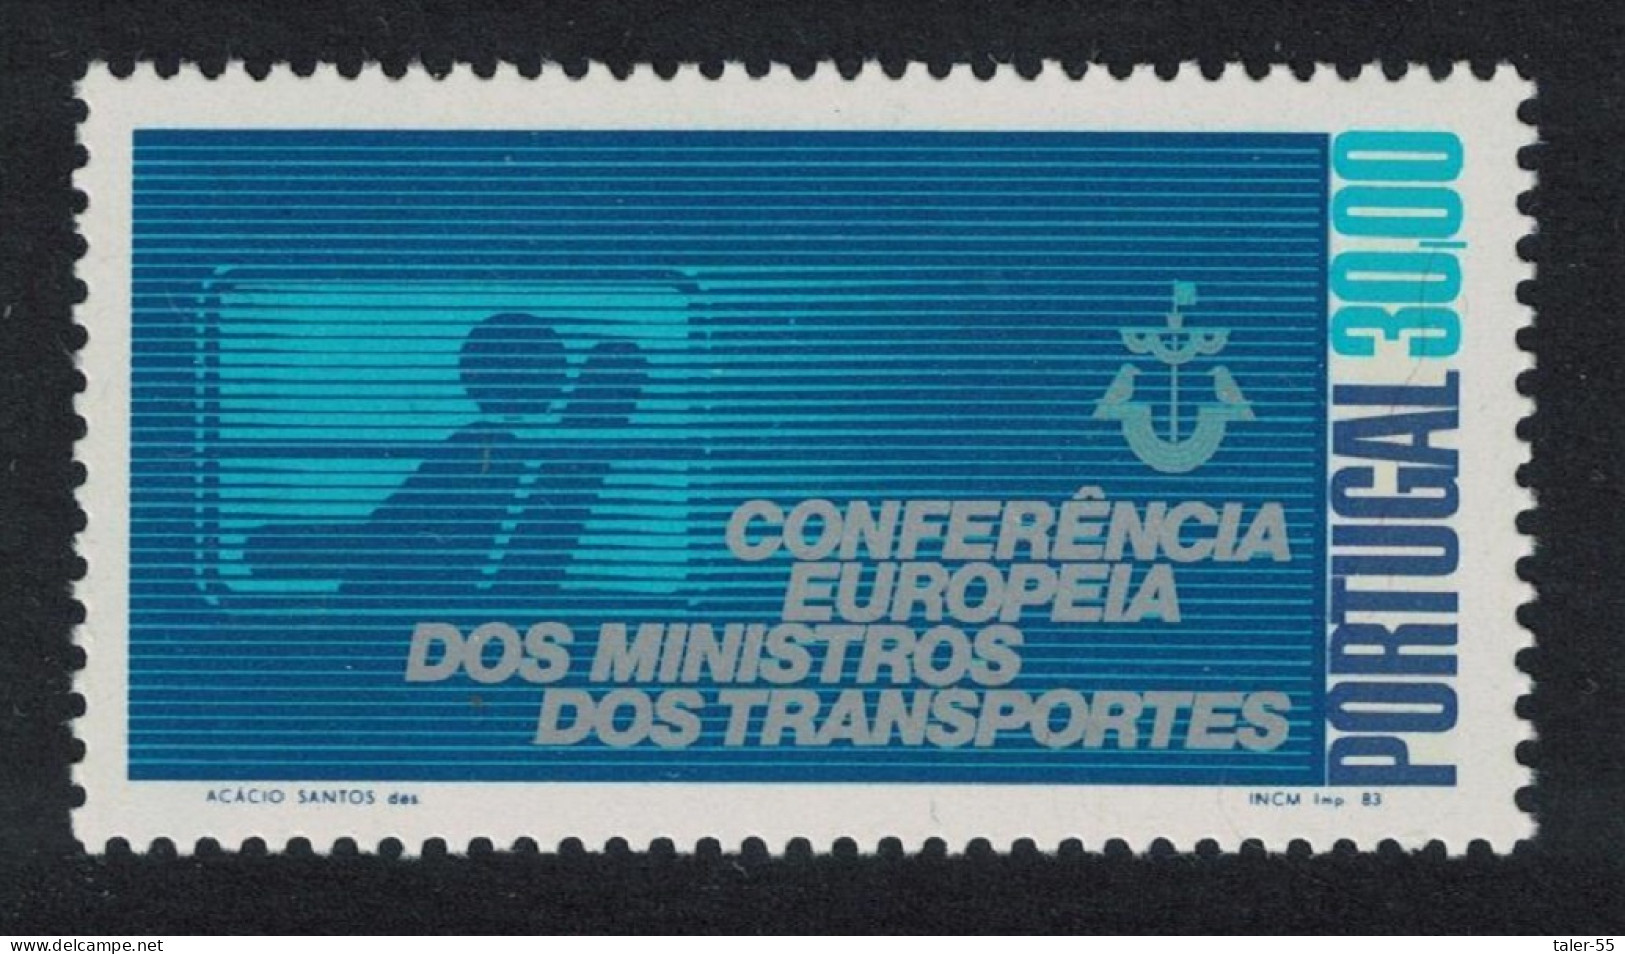 Portugal European Ministers Of Transport Conference 1983 MNH SG#1925 - Unused Stamps